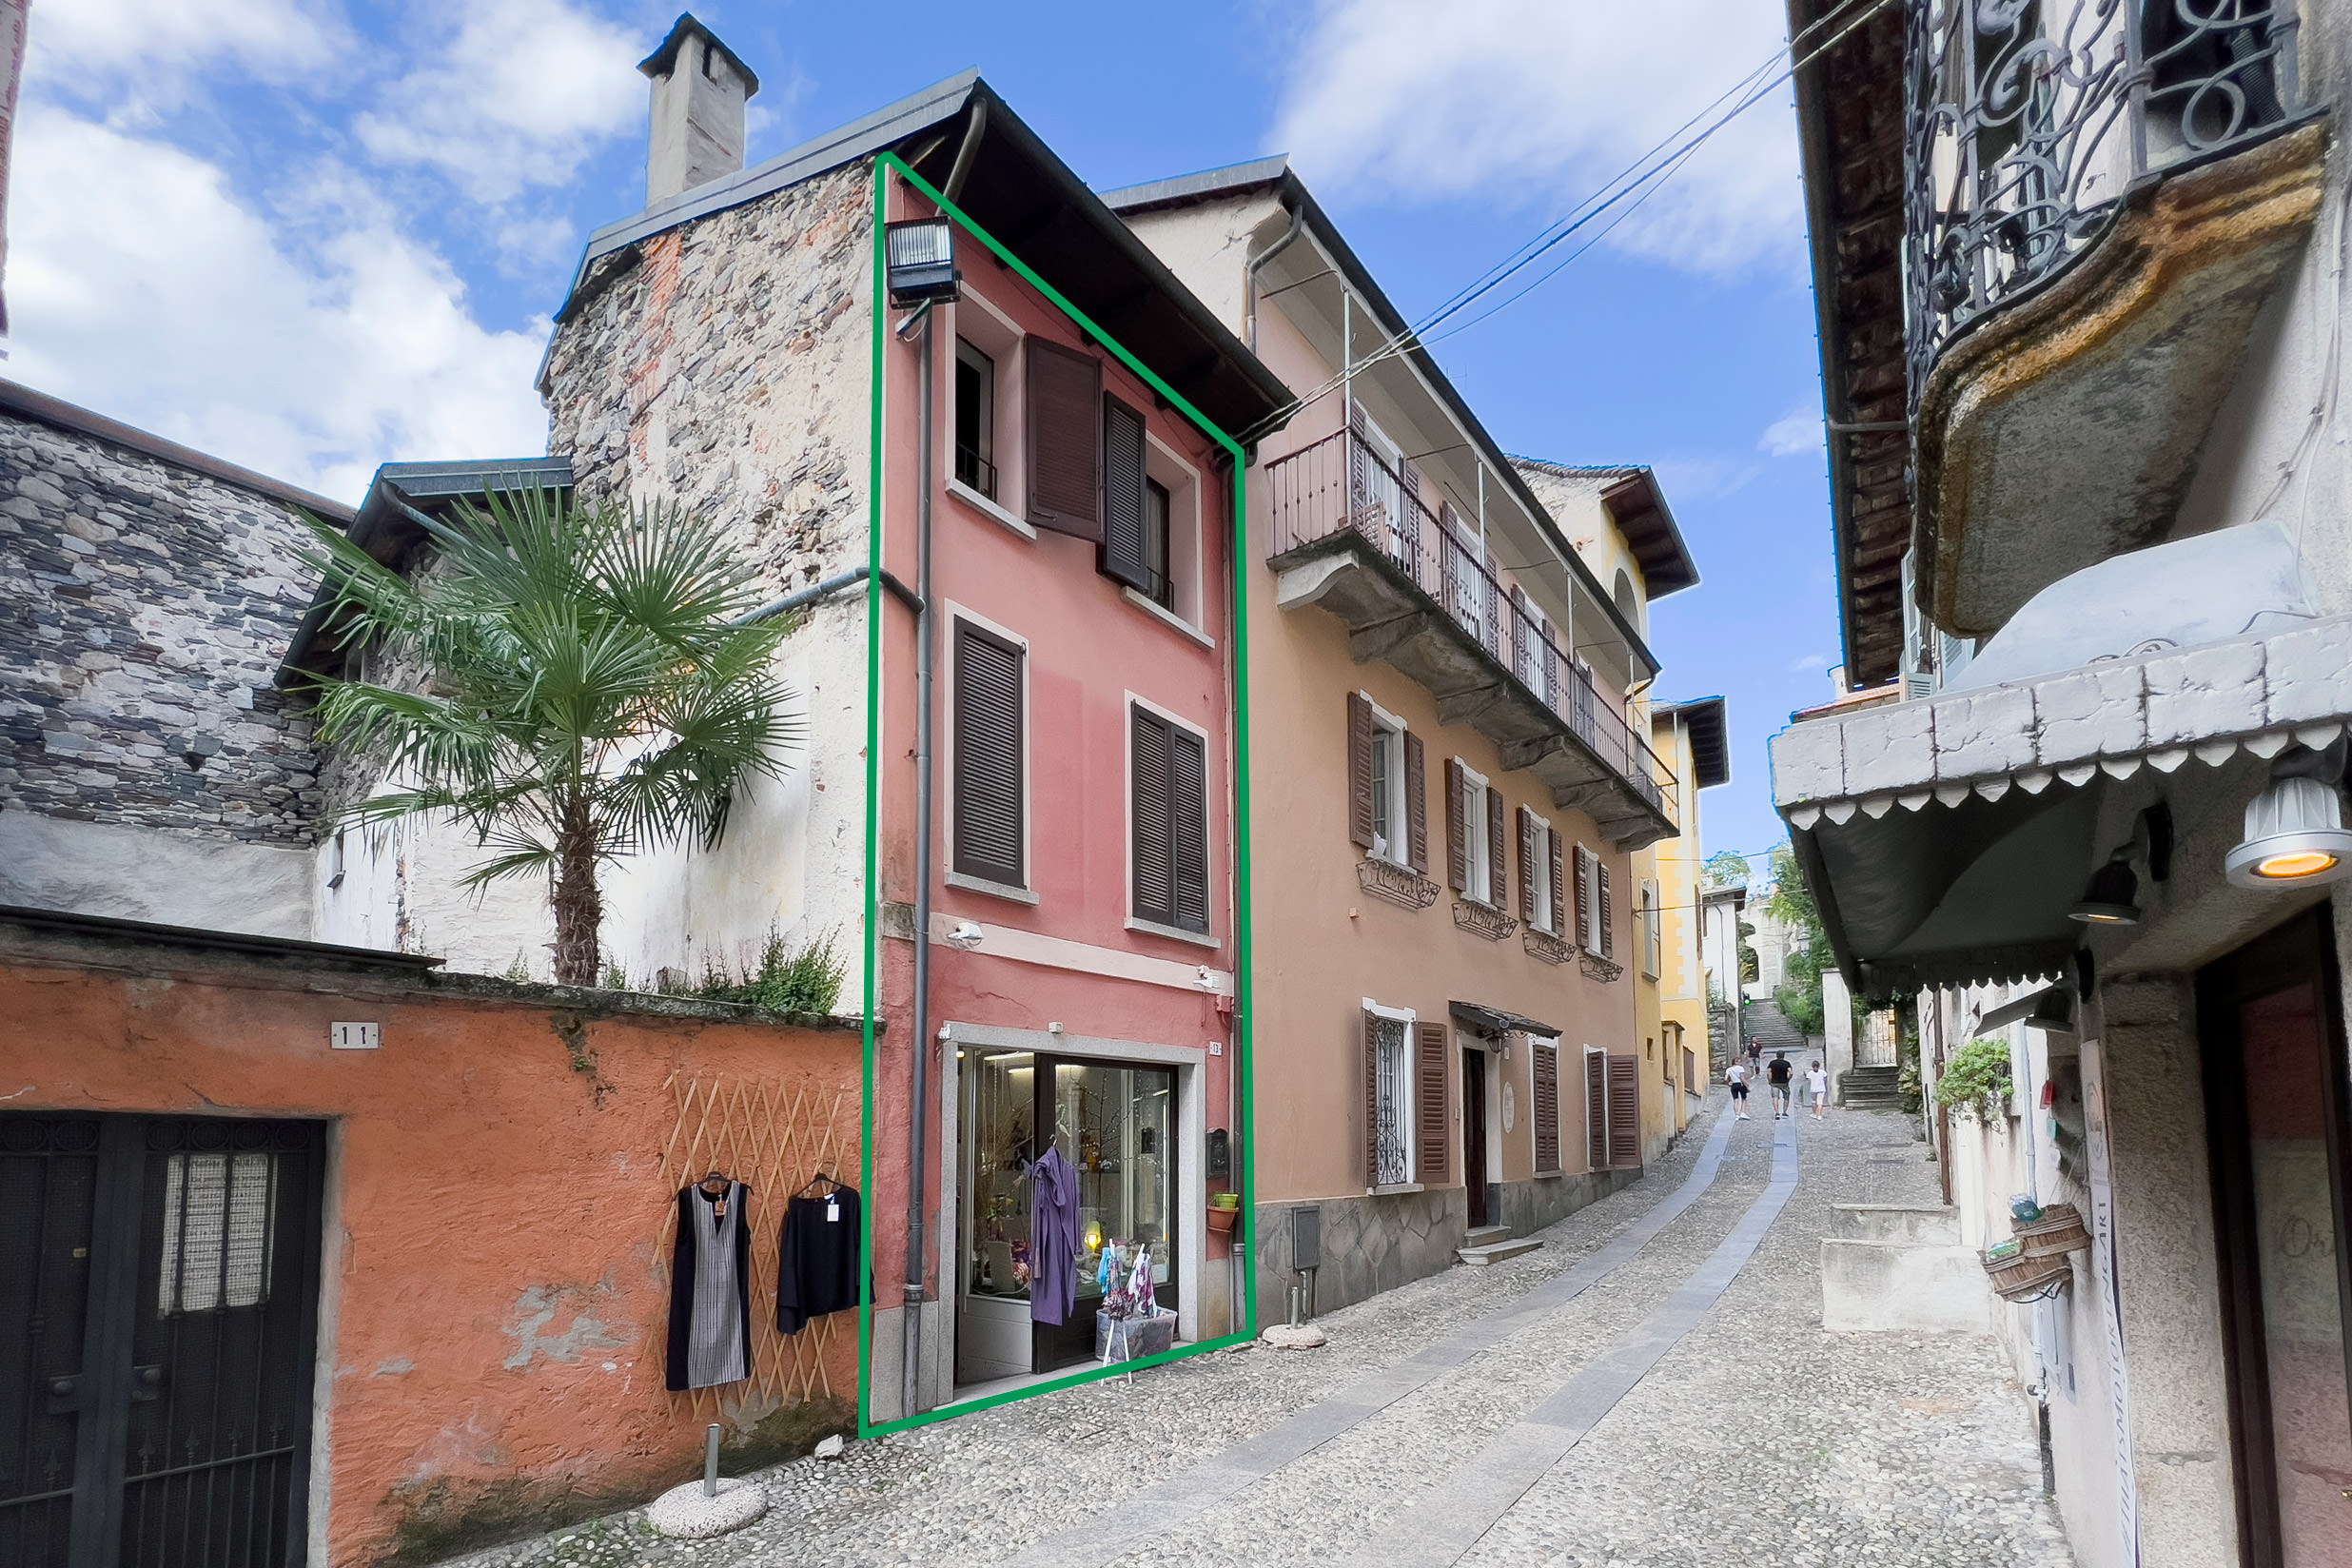 ORTA House with a shop